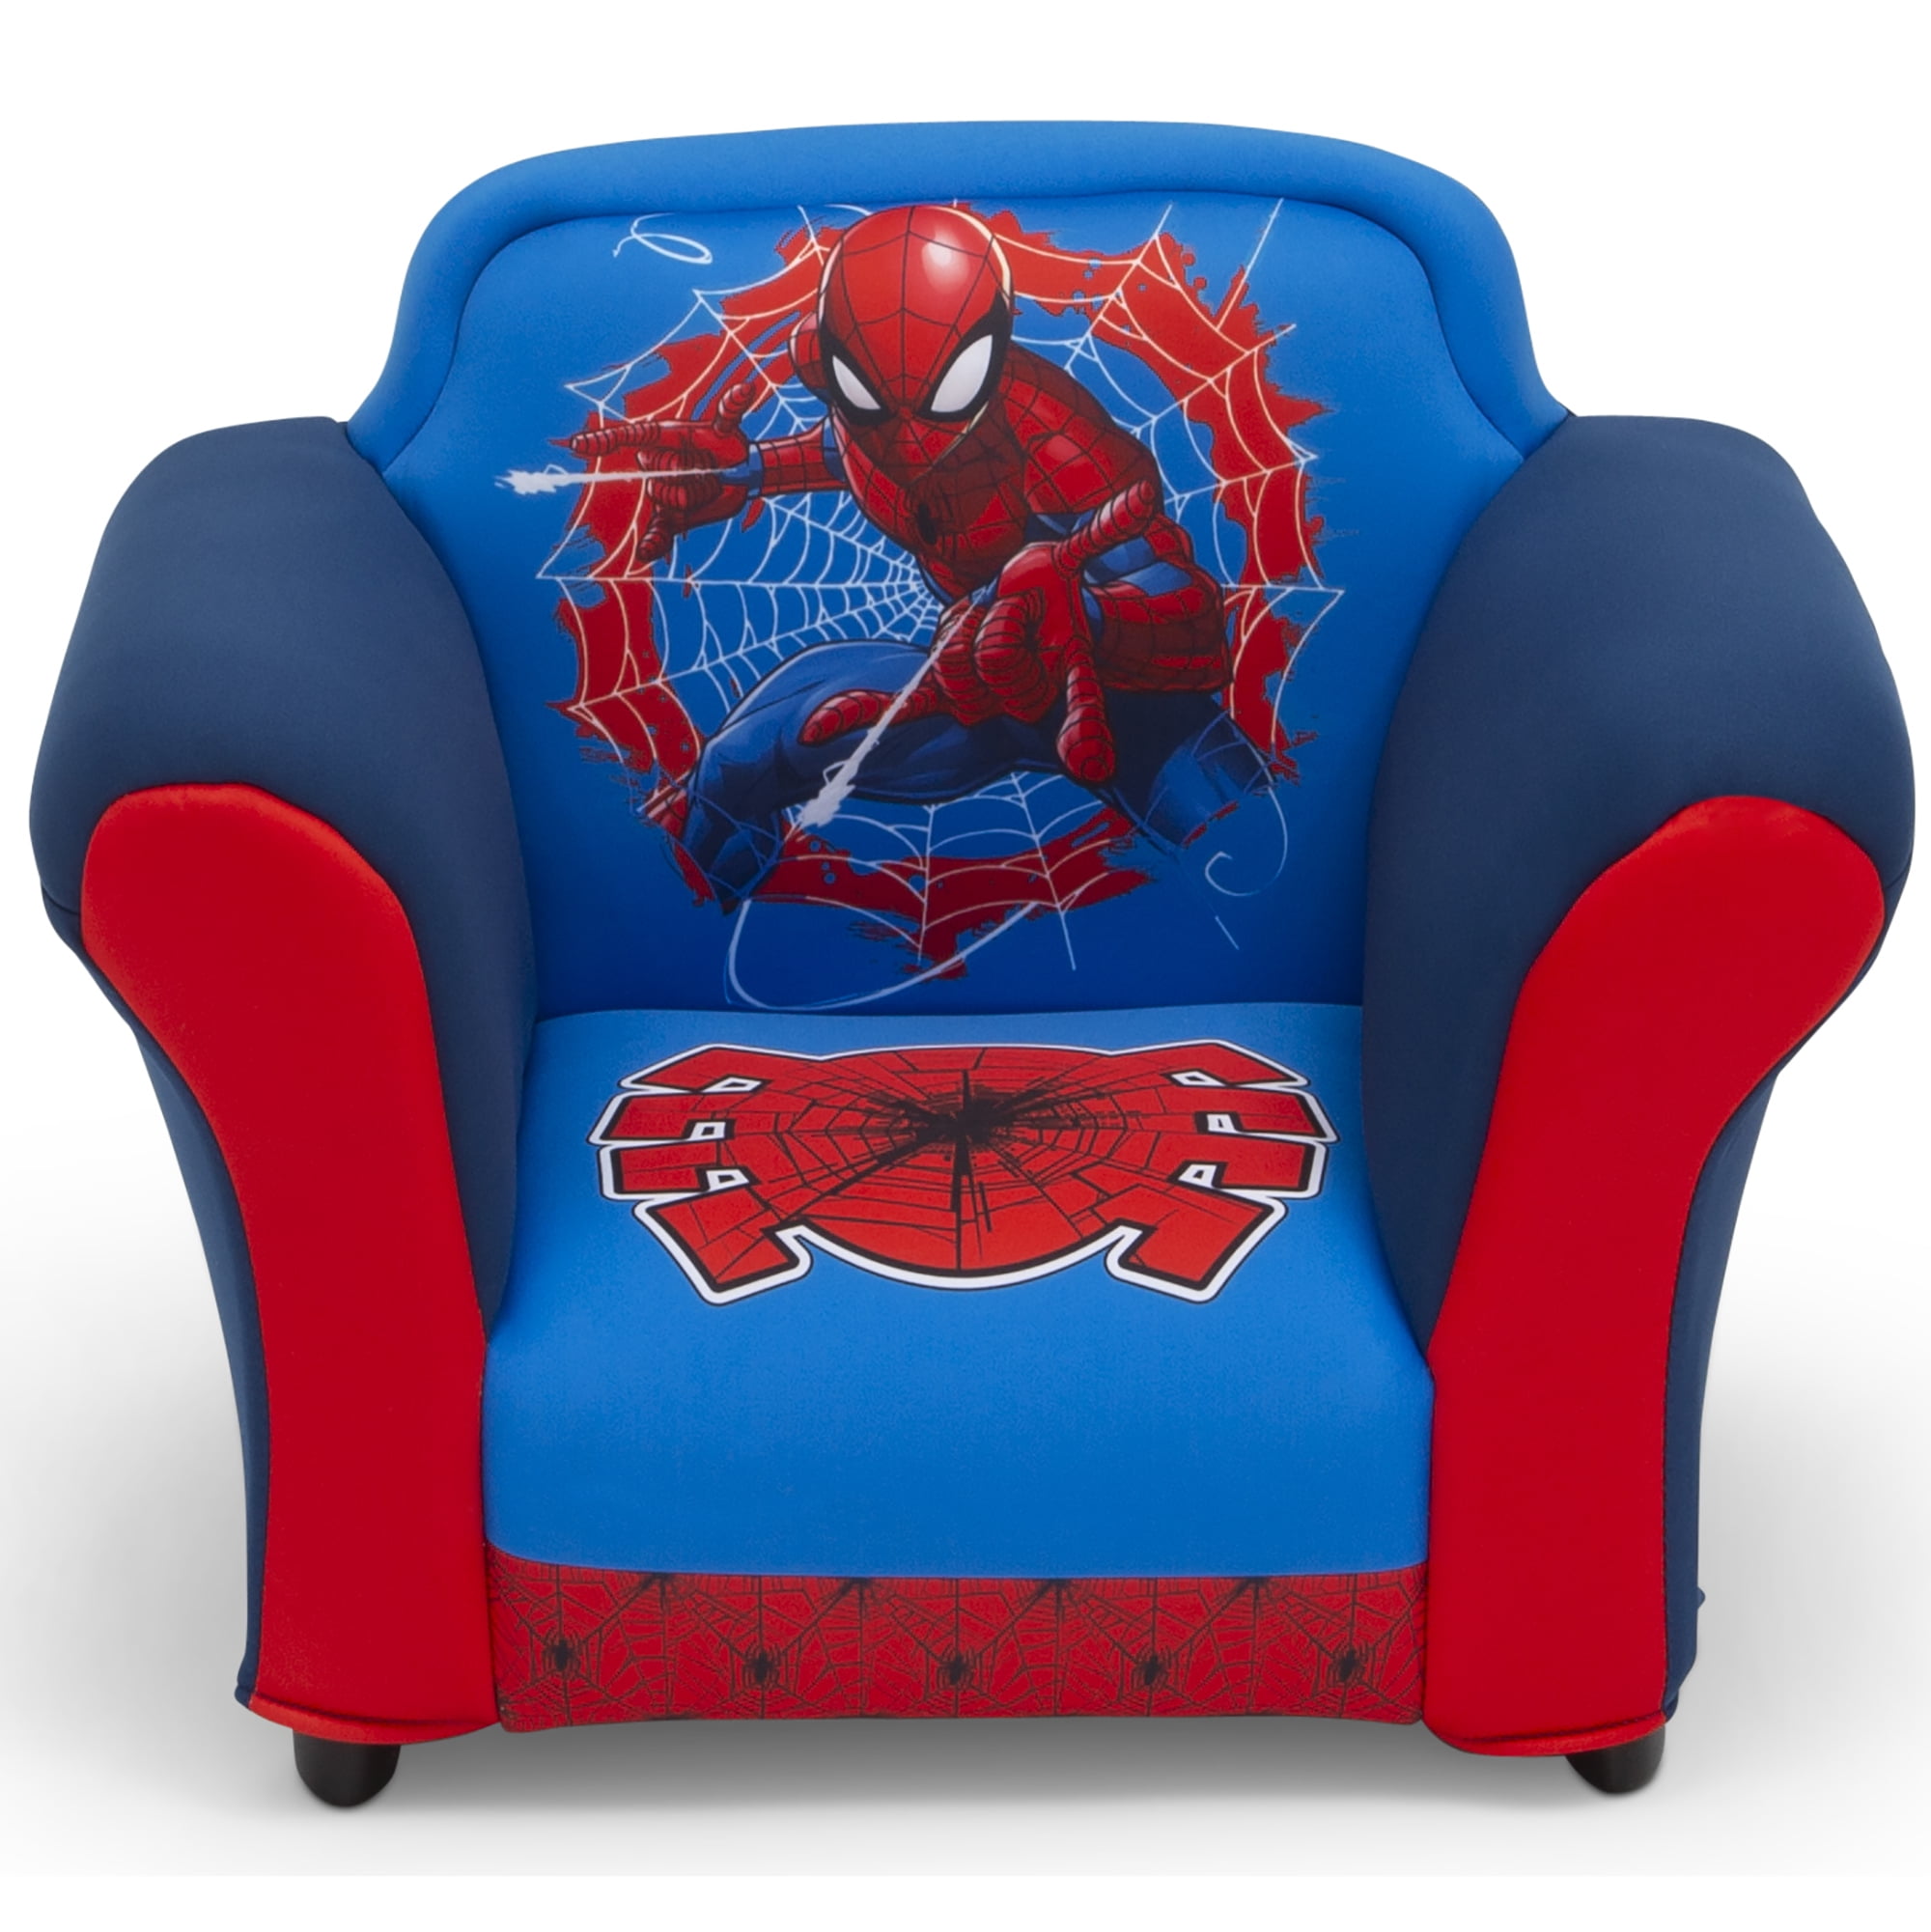 Marvel SpiderMan Upholstered Chair with Sculpted Plastic